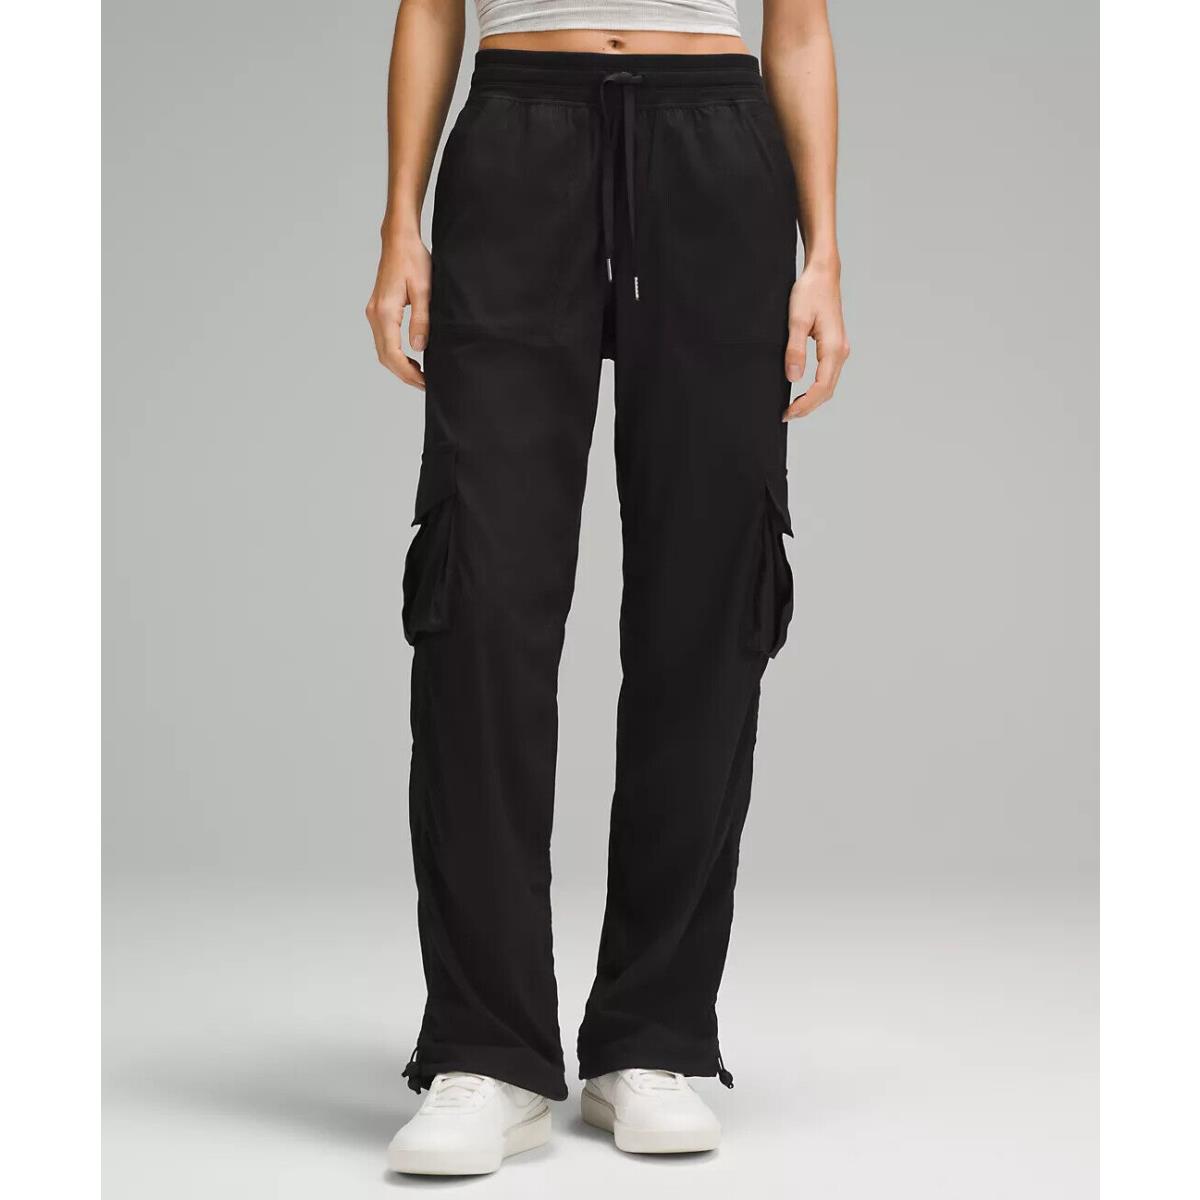 Lululemon Dance Studio Relaxed Fit Mid Rise Cargo Pant - Retail